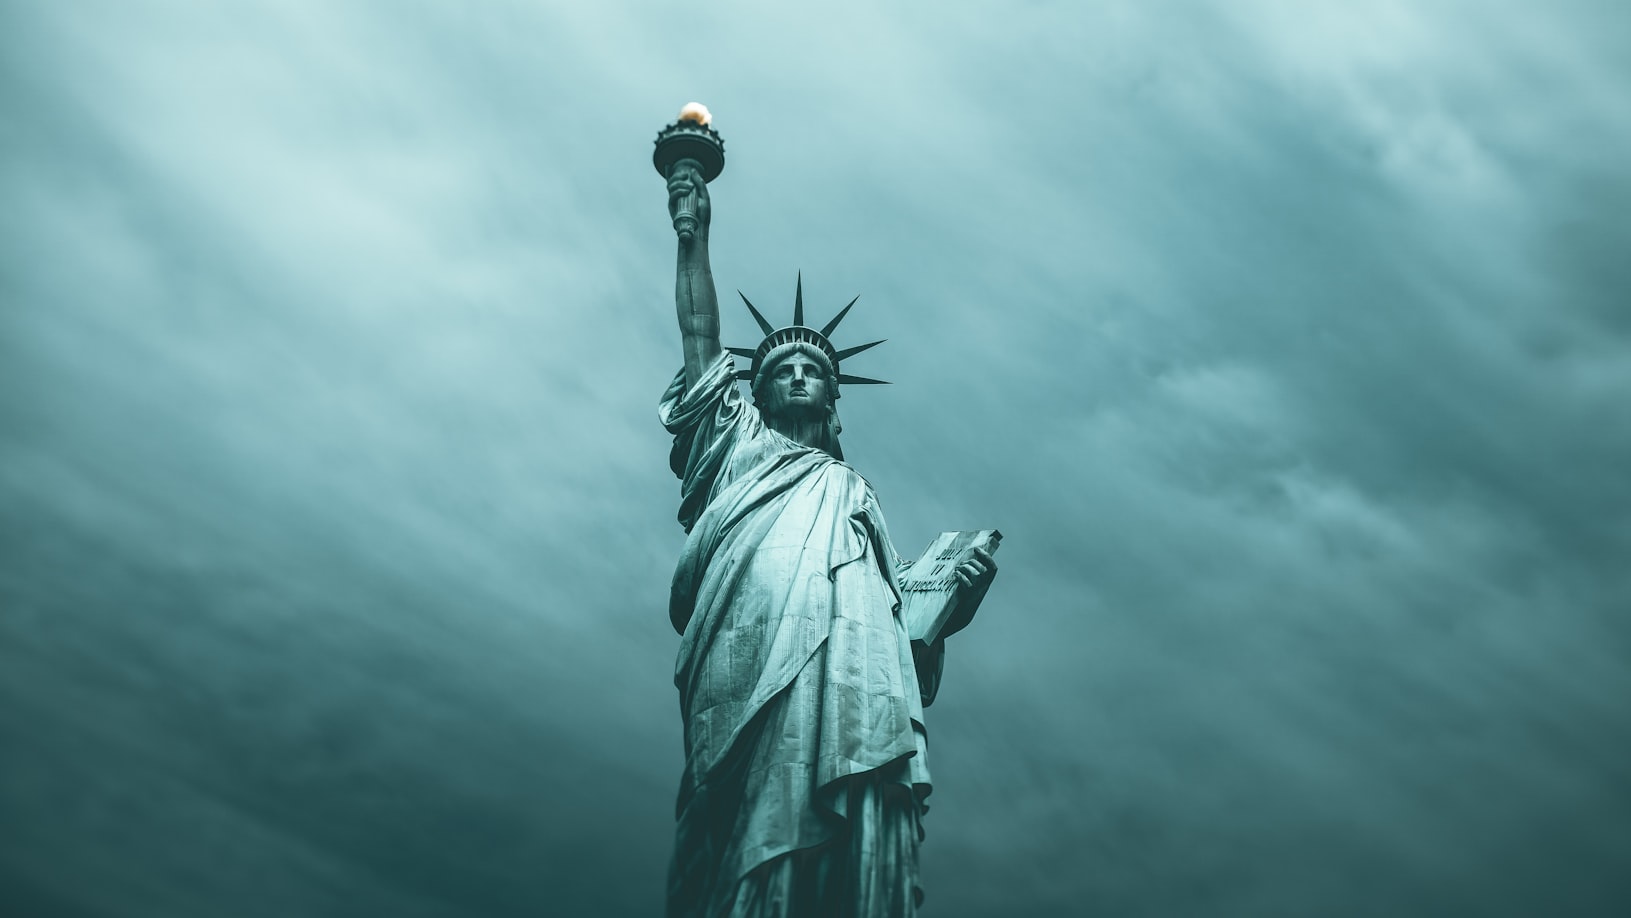 The Statue of Liberty was not a gift from France to the United States